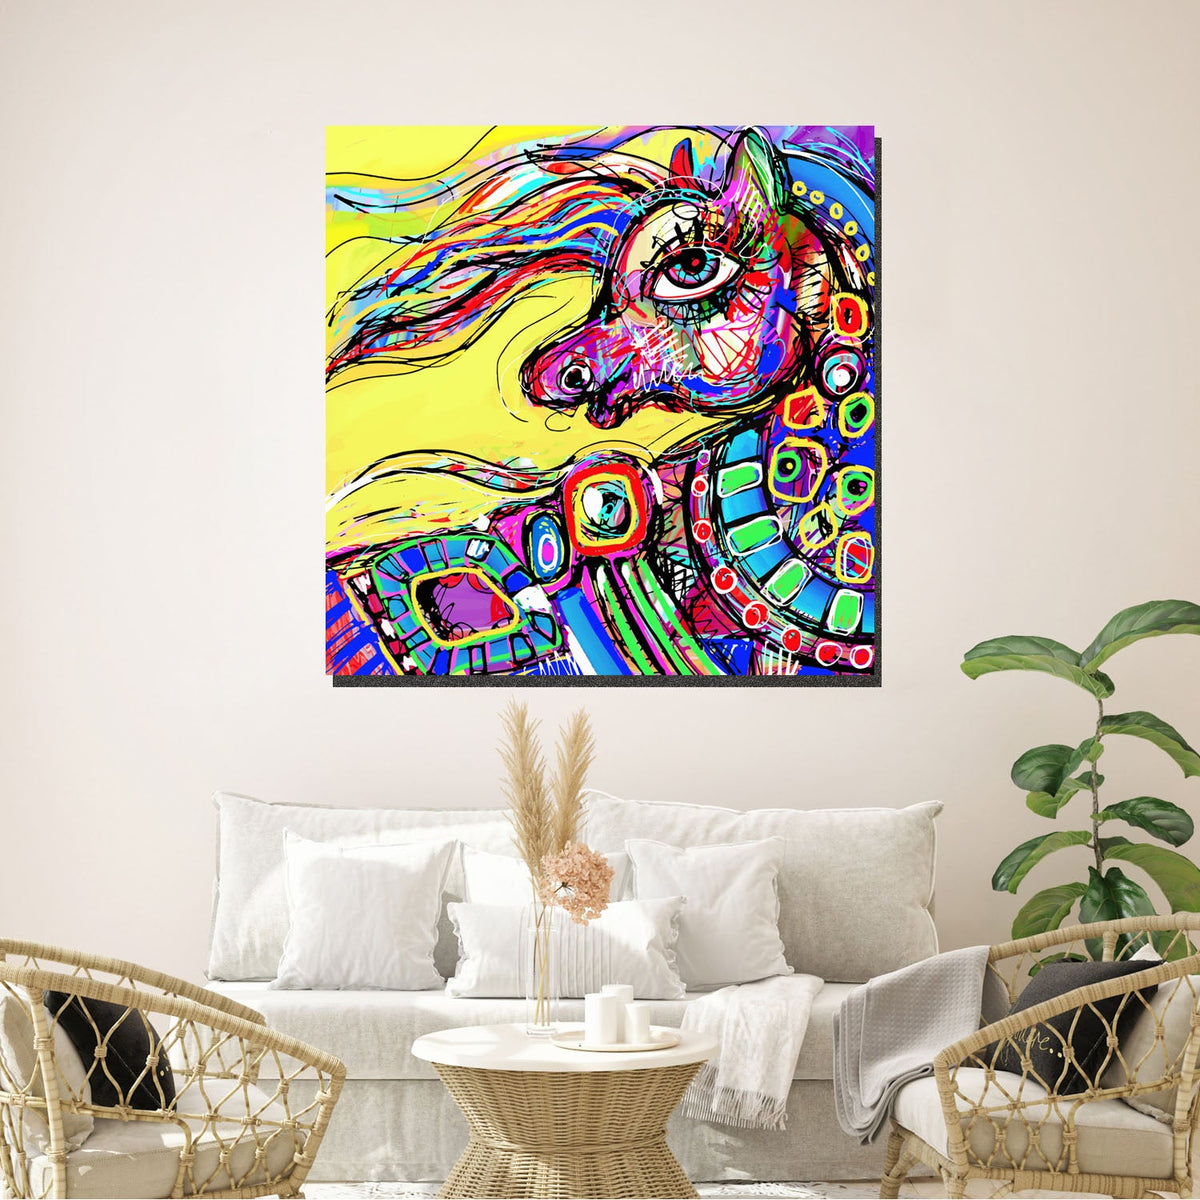 https://cdn.shopify.com/s/files/1/0387/9986/8044/products/AbstractHorseCanvasArtPrintStretched-4.jpg